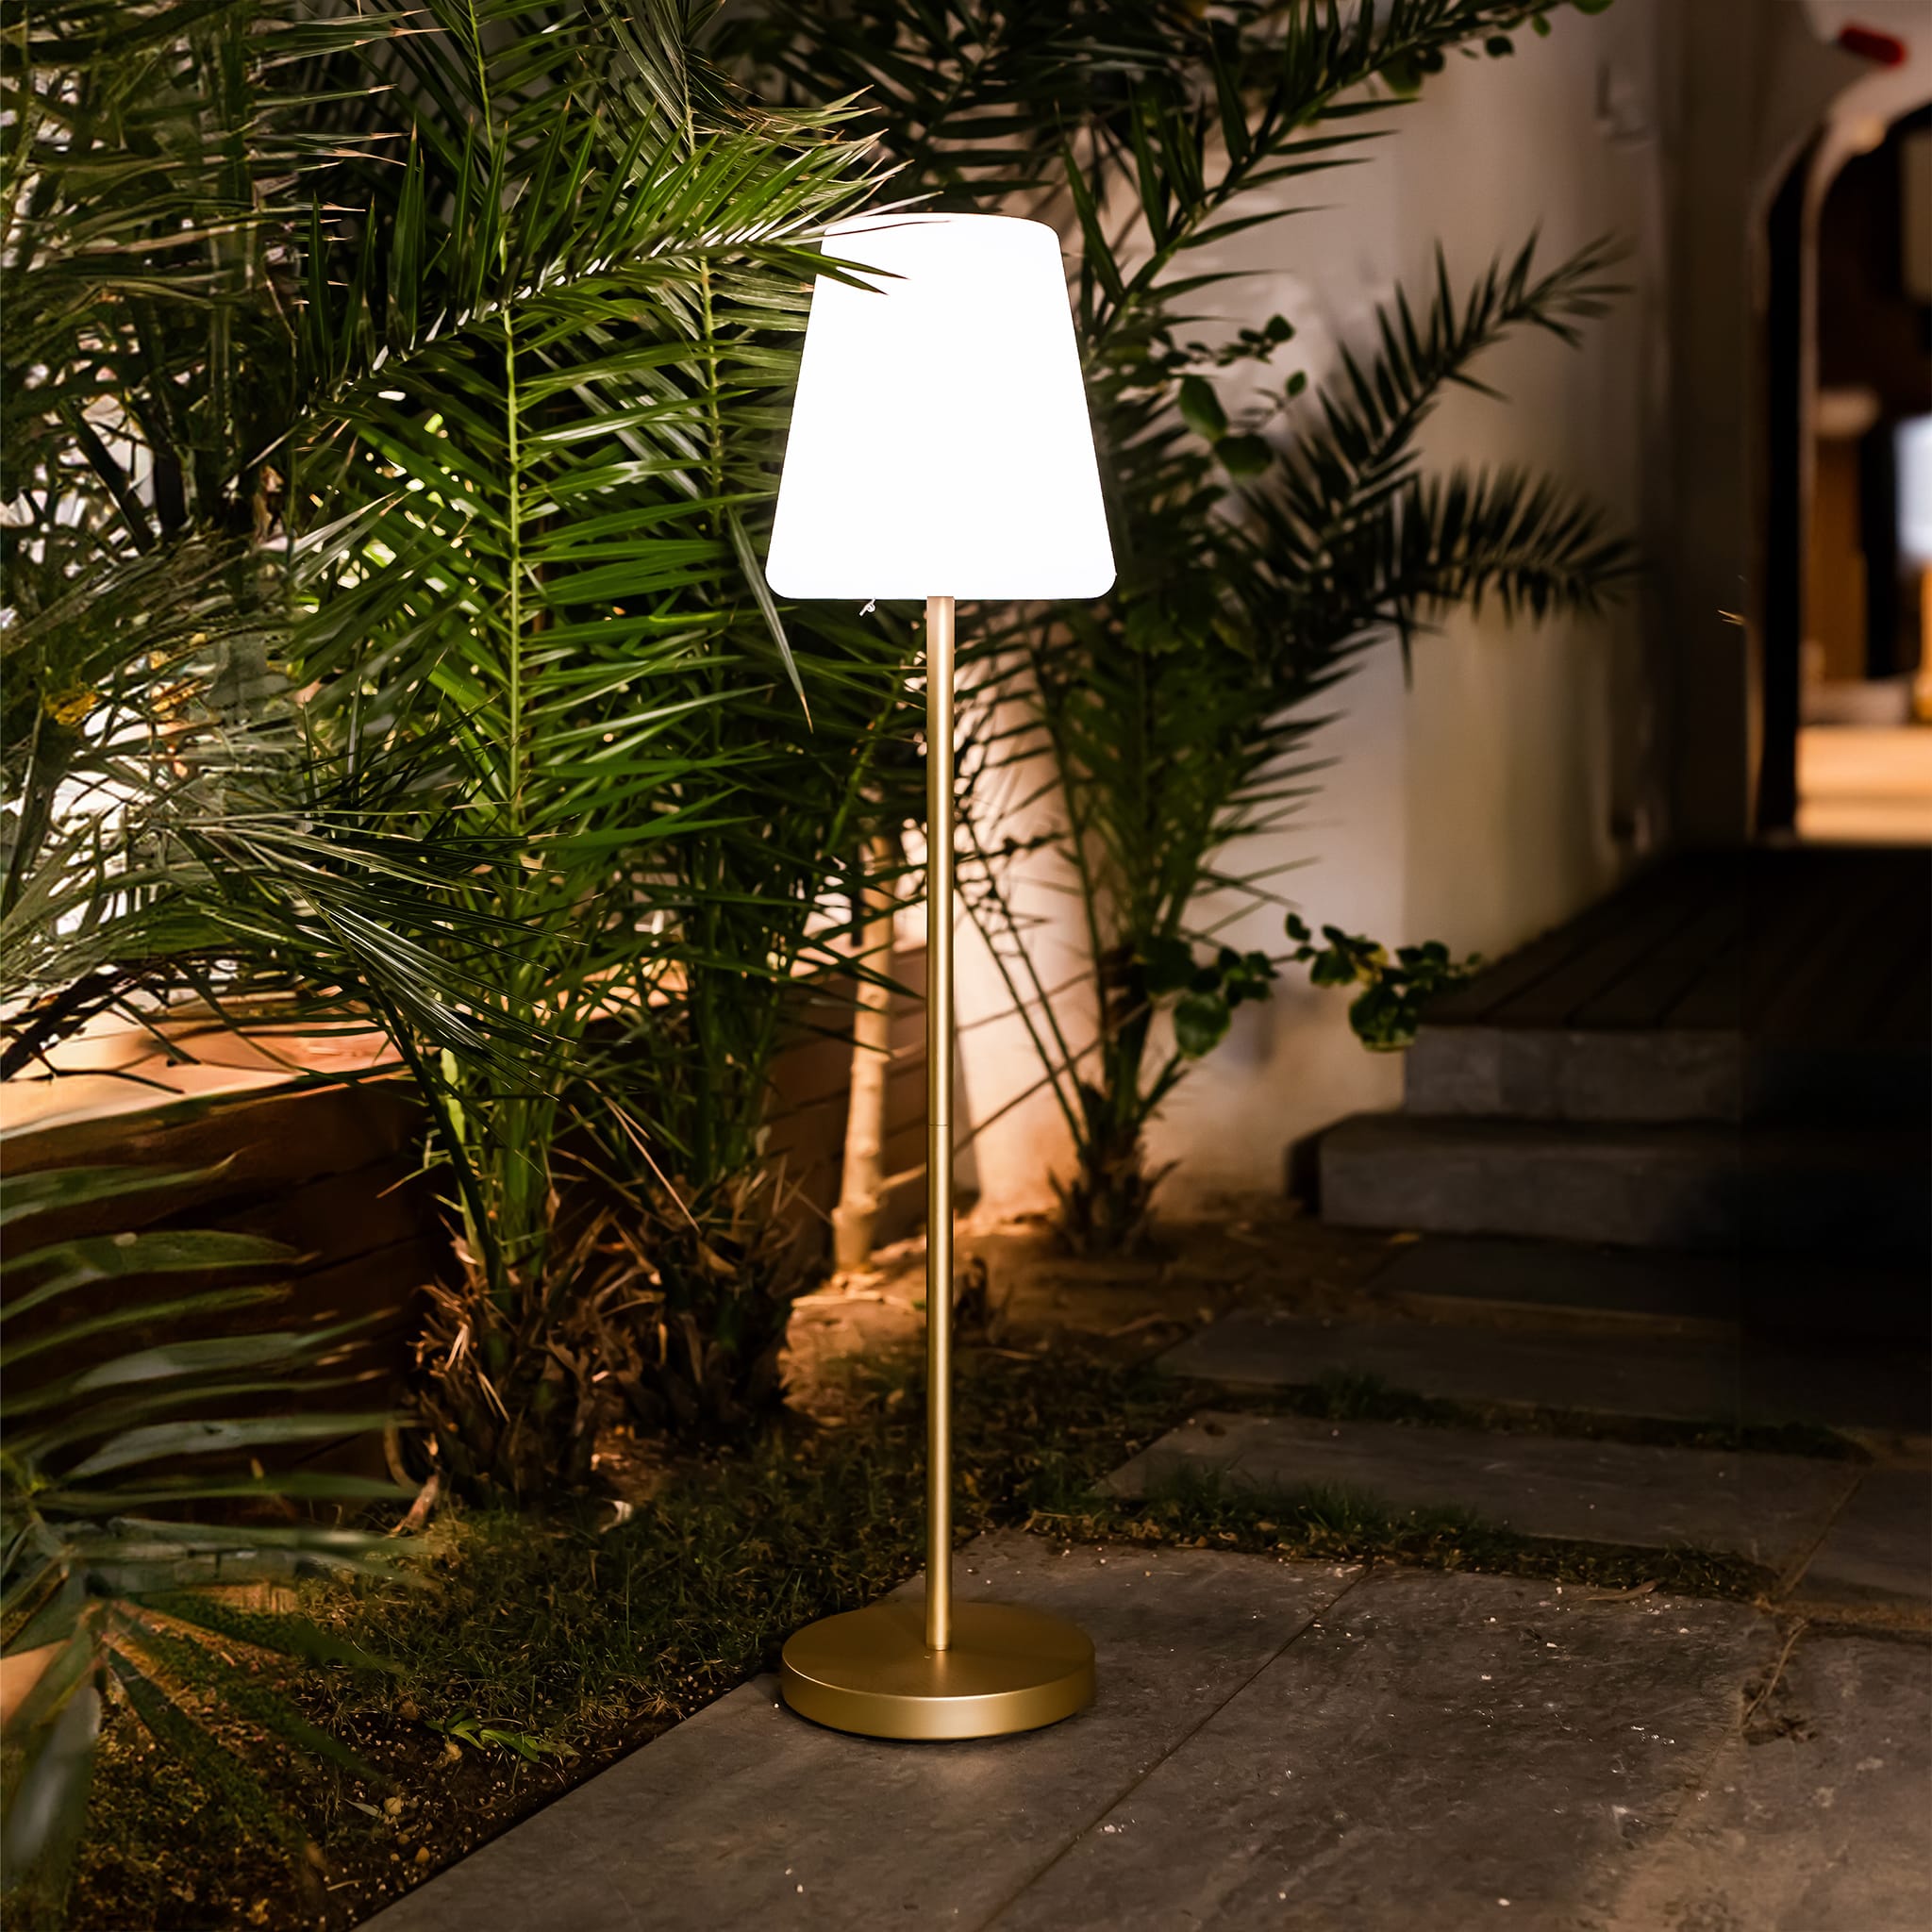 Discover the Lola Slim 180: a sleek, durable LED floor lamp, creating a warm, inviting ambiance in any indoor or outdoor area.